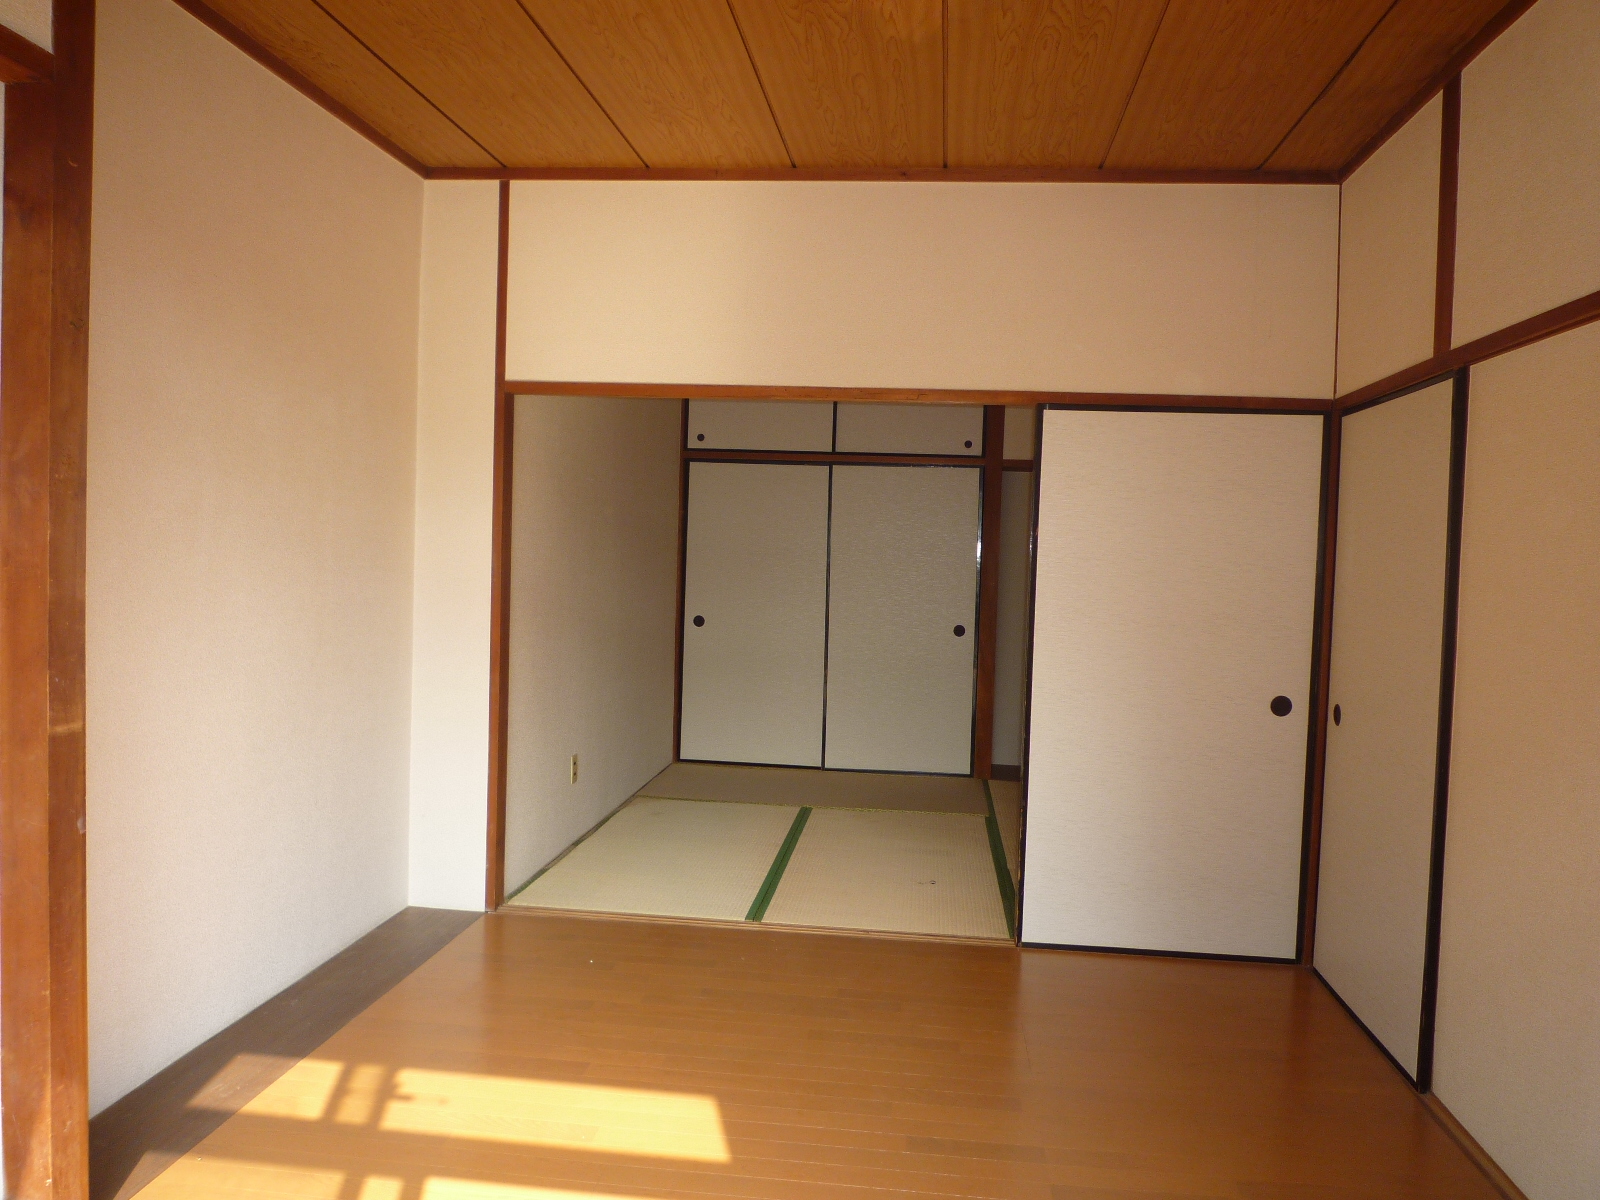 Living and room. Western style room ・ It's open and open the bran of the Japanese-style room